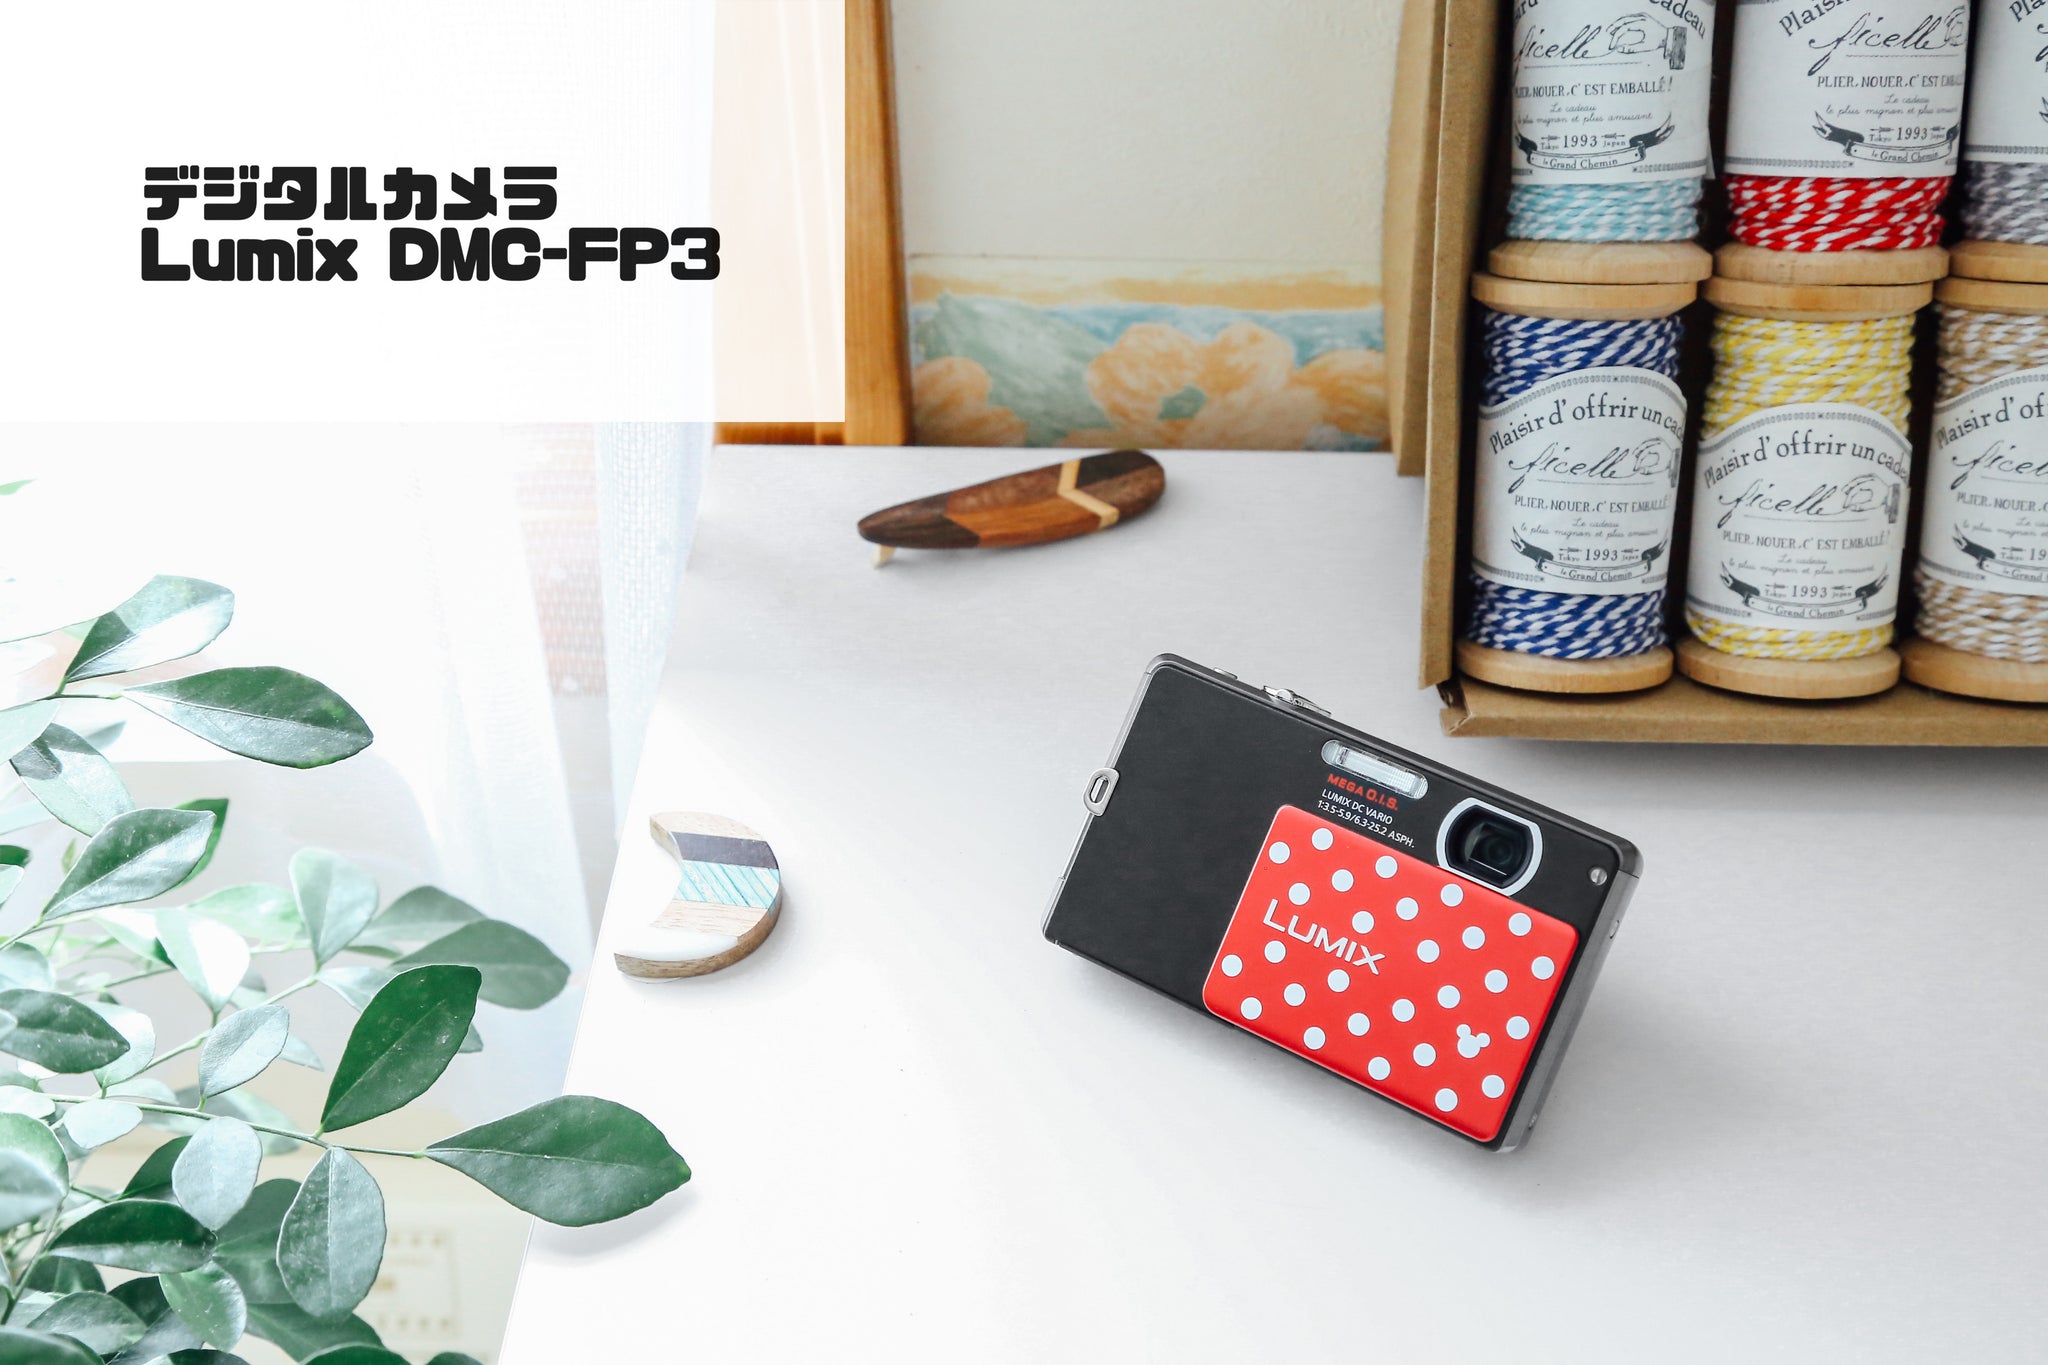 Panasonic DMC-FP3 Disney specification [In perfect working order